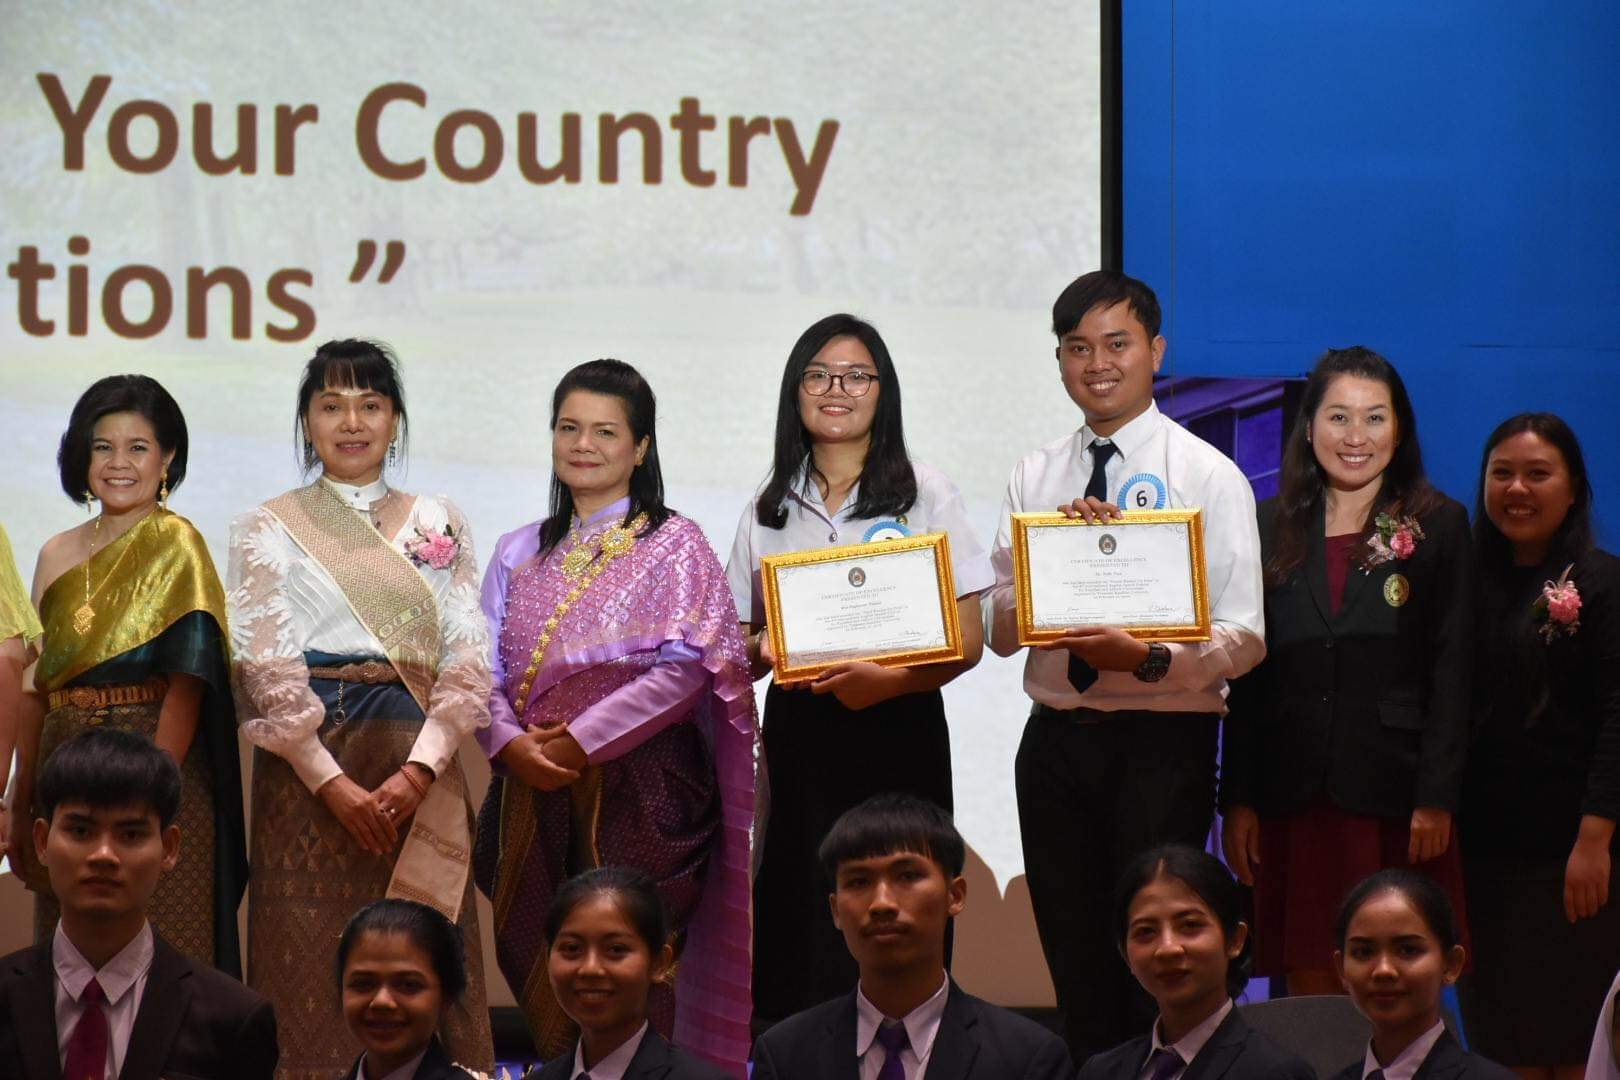 IACE 2020: The 6th International English Speech Contest “Recent Environment Issues in Your Country and Their Practical Solutions”